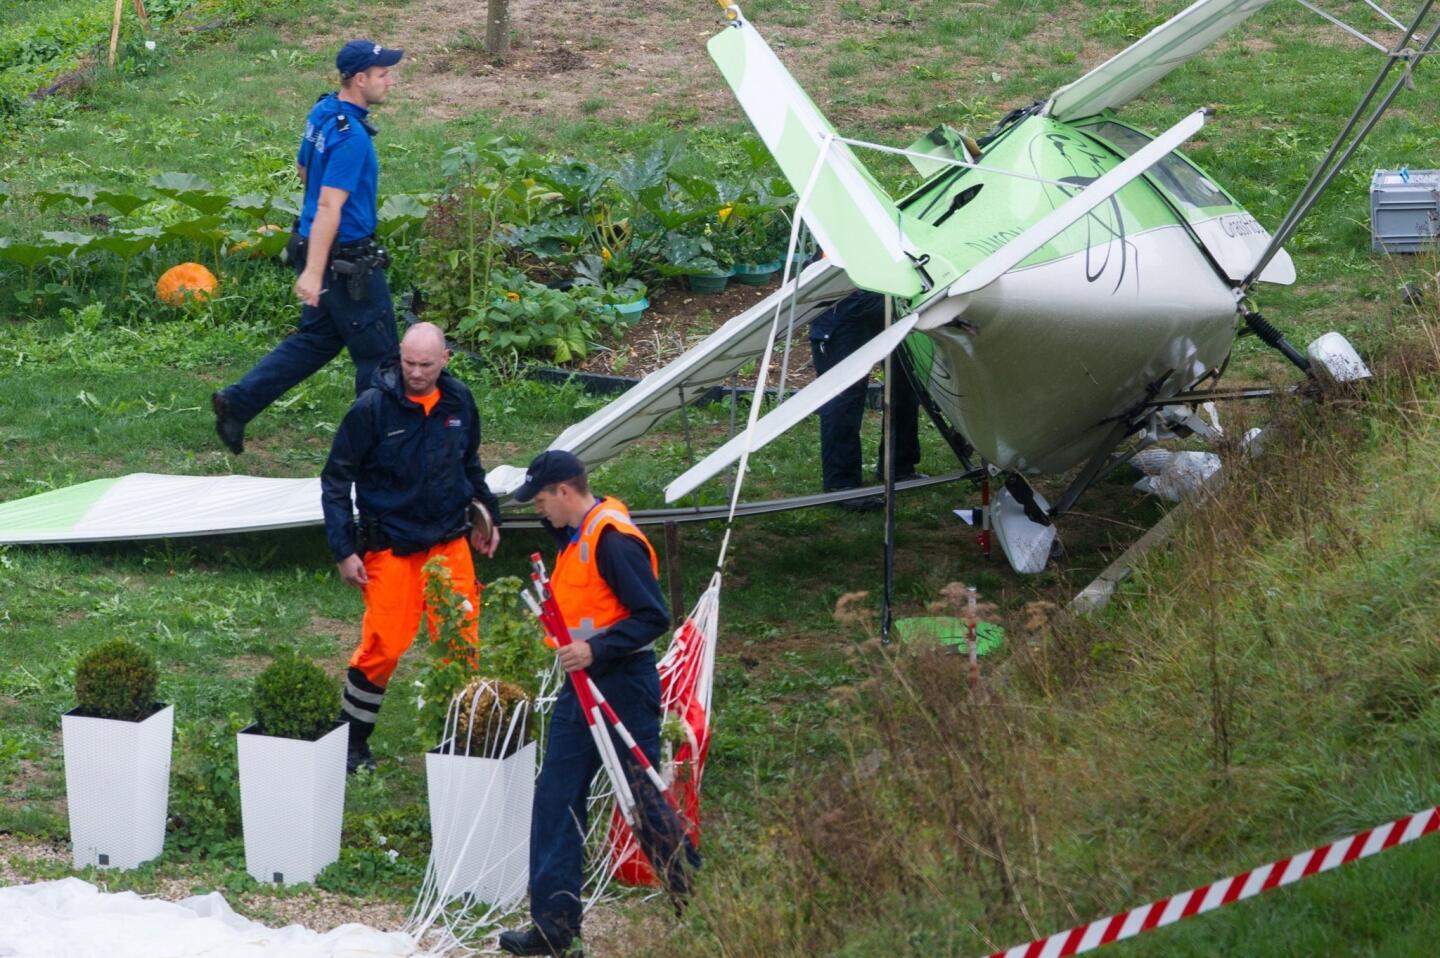 Swiss police officers inspect the wreckage of a plane involved in a collision with a second plane during an air show on Aug. 23, 2015, in Dittingen, Switzerland.